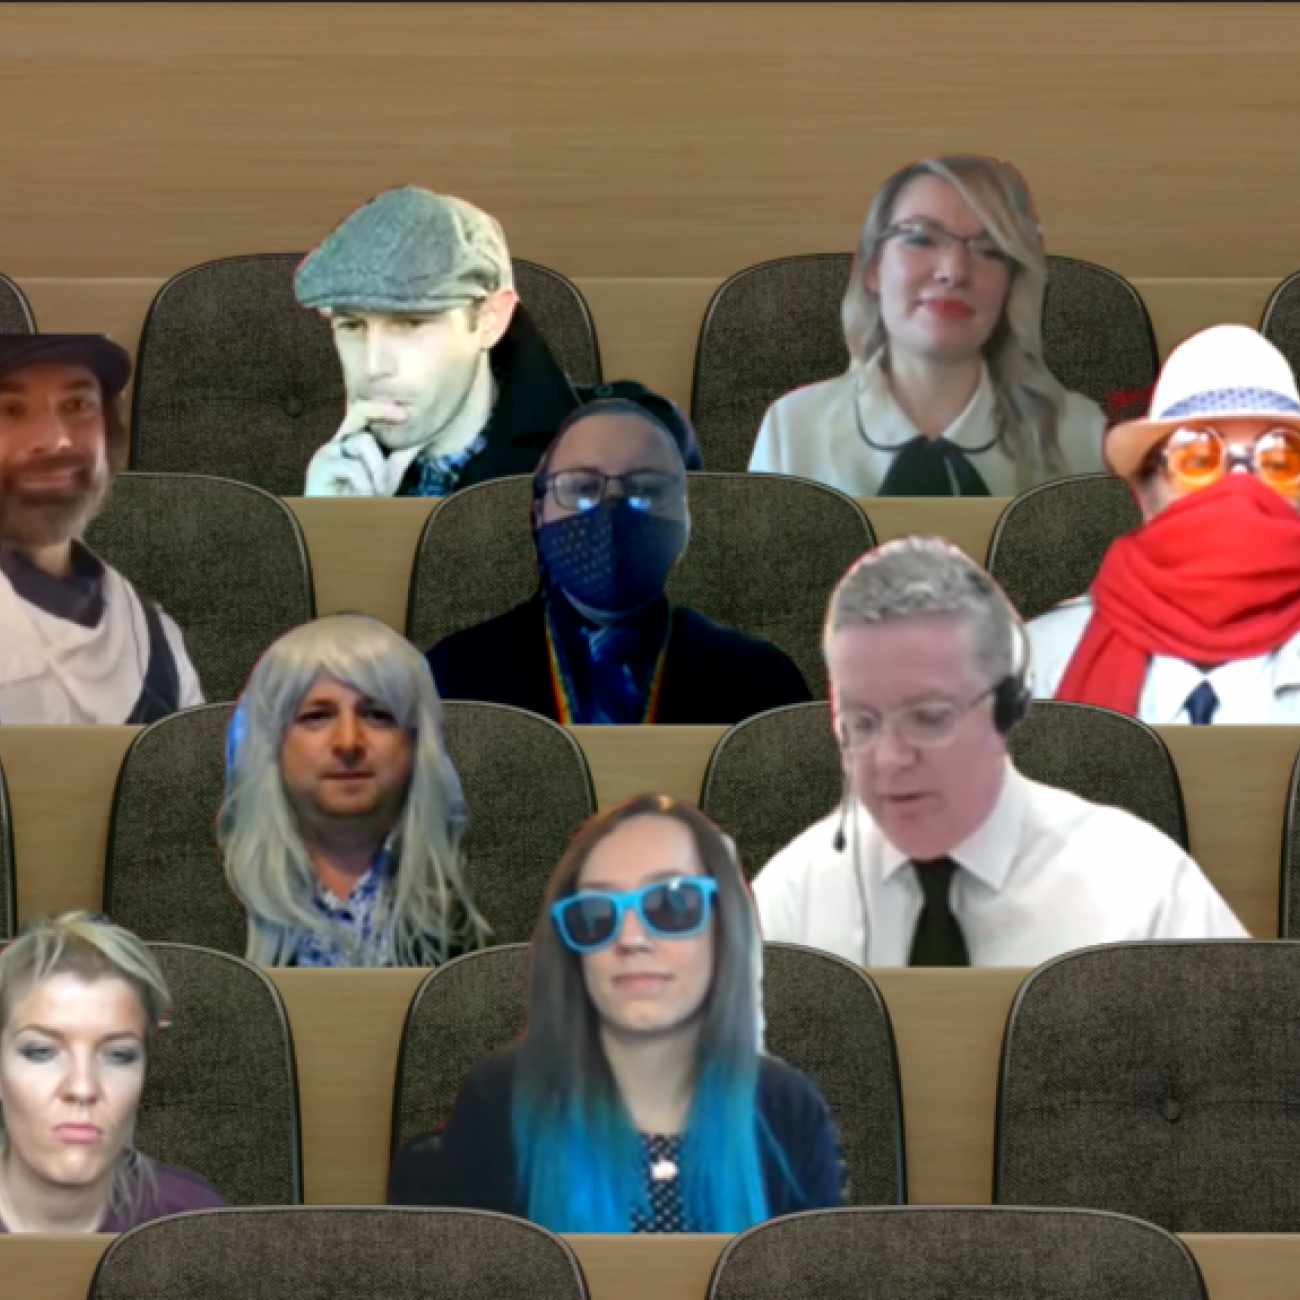 Our team members in disguise as part of a virtual murder mystery game